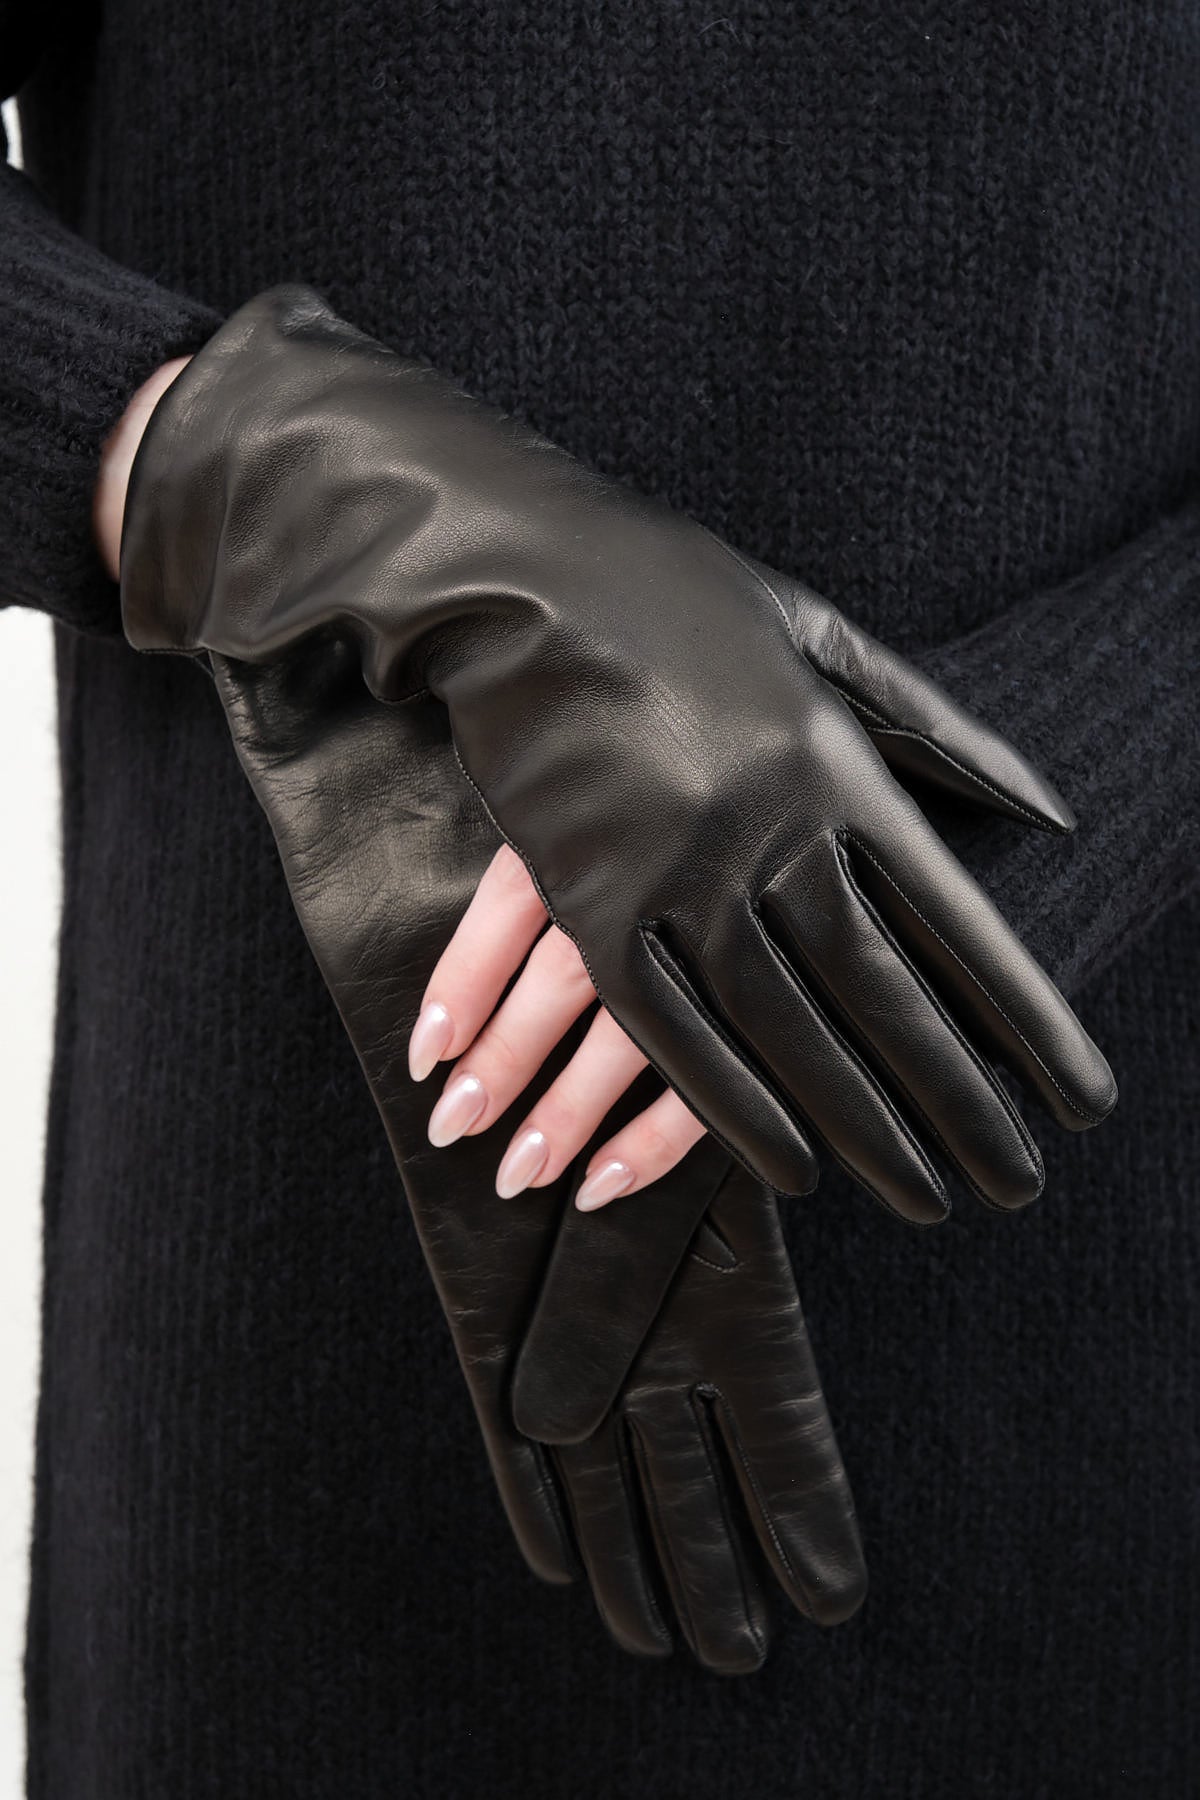 Clyde Classic Leather Gloves in Black